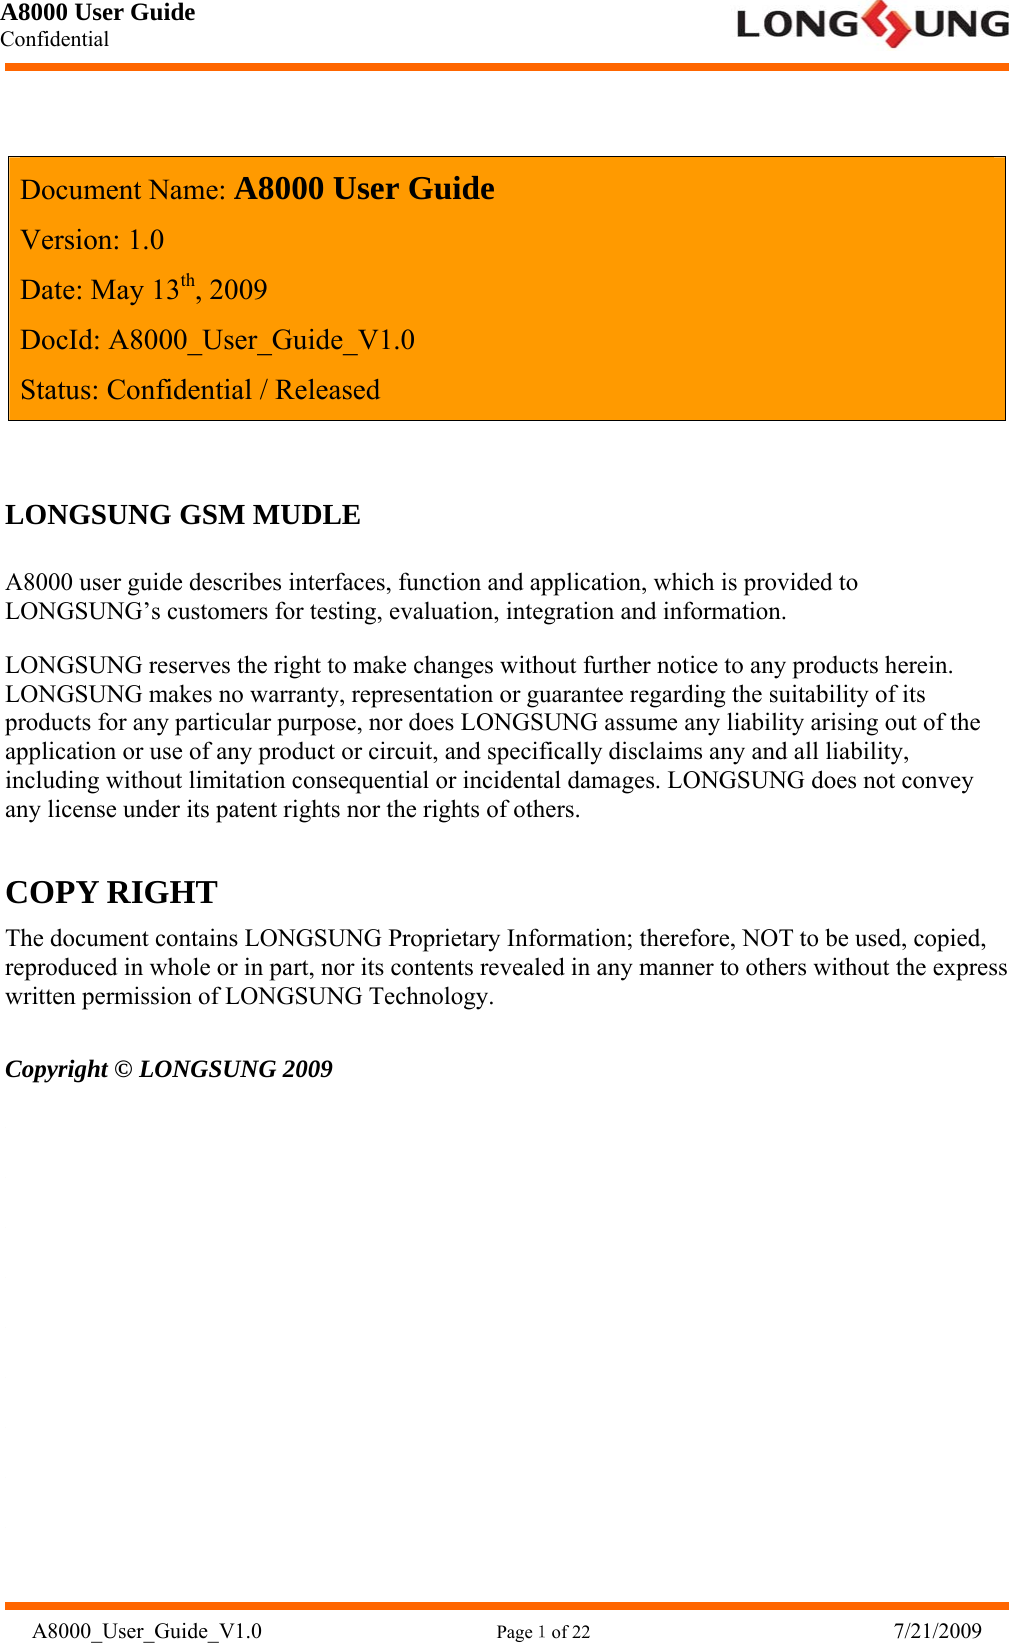 A8000 User Guide Confidential   A8000_User_Guide_V1.0                      Page１of 22                              7/21/2009    Document Name: A8000 User Guide Version: 1.0 Date: May 13th, 2009 DocId: A8000_User_Guide_V1.0 Status: Confidential / Released  LONGSUNG GSM MUDLE A8000 user guide describes interfaces, function and application, which is provided to LONGSUNG’s customers for testing, evaluation, integration and information. LONGSUNG reserves the right to make changes without further notice to any products herein. LONGSUNG makes no warranty, representation or guarantee regarding the suitability of its products for any particular purpose, nor does LONGSUNG assume any liability arising out of the application or use of any product or circuit, and specifically disclaims any and all liability, including without limitation consequential or incidental damages. LONGSUNG does not convey any license under its patent rights nor the rights of others. COPY RIGHT The document contains LONGSUNG Proprietary Information; therefore, NOT to be used, copied, reproduced in whole or in part, nor its contents revealed in any manner to others without the express written permission of LONGSUNG Technology. Copyright © LONGSUNG 2009          